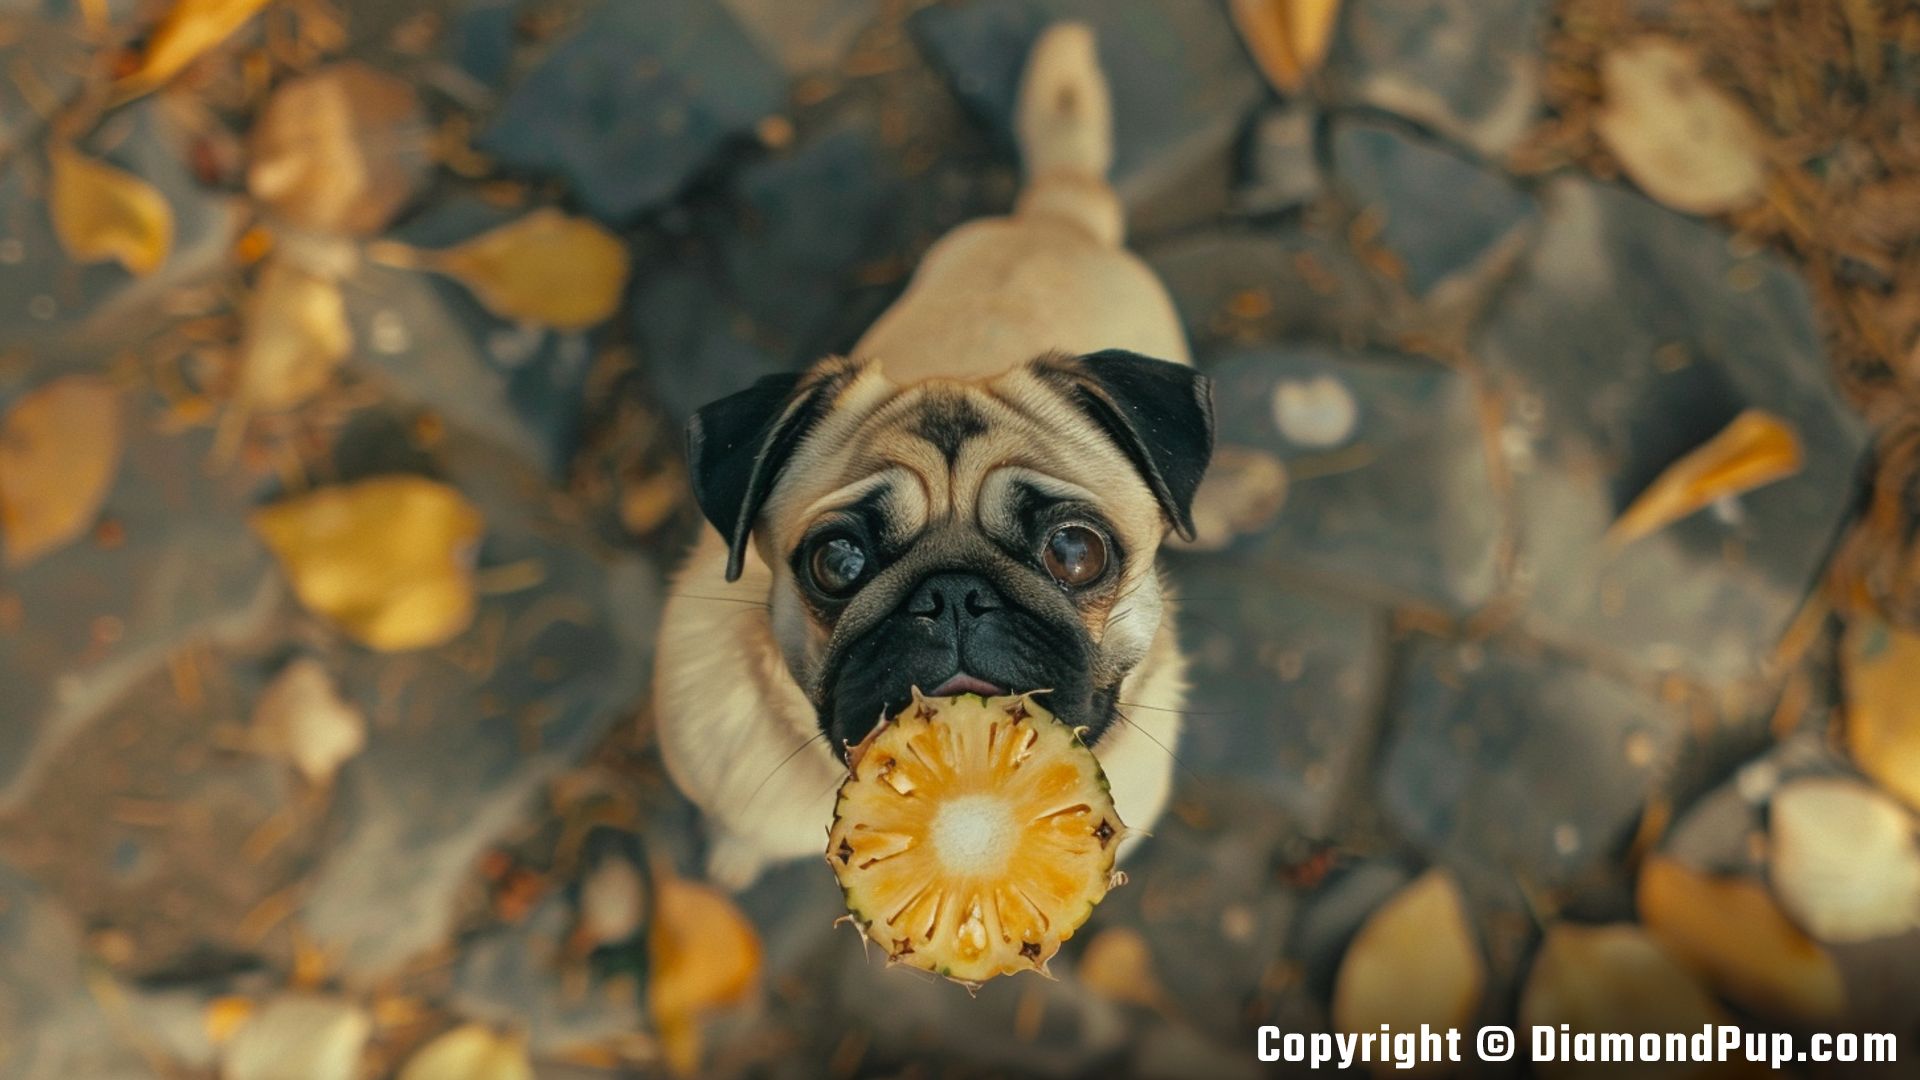 Image of a Cute Pug Eating Pineapple